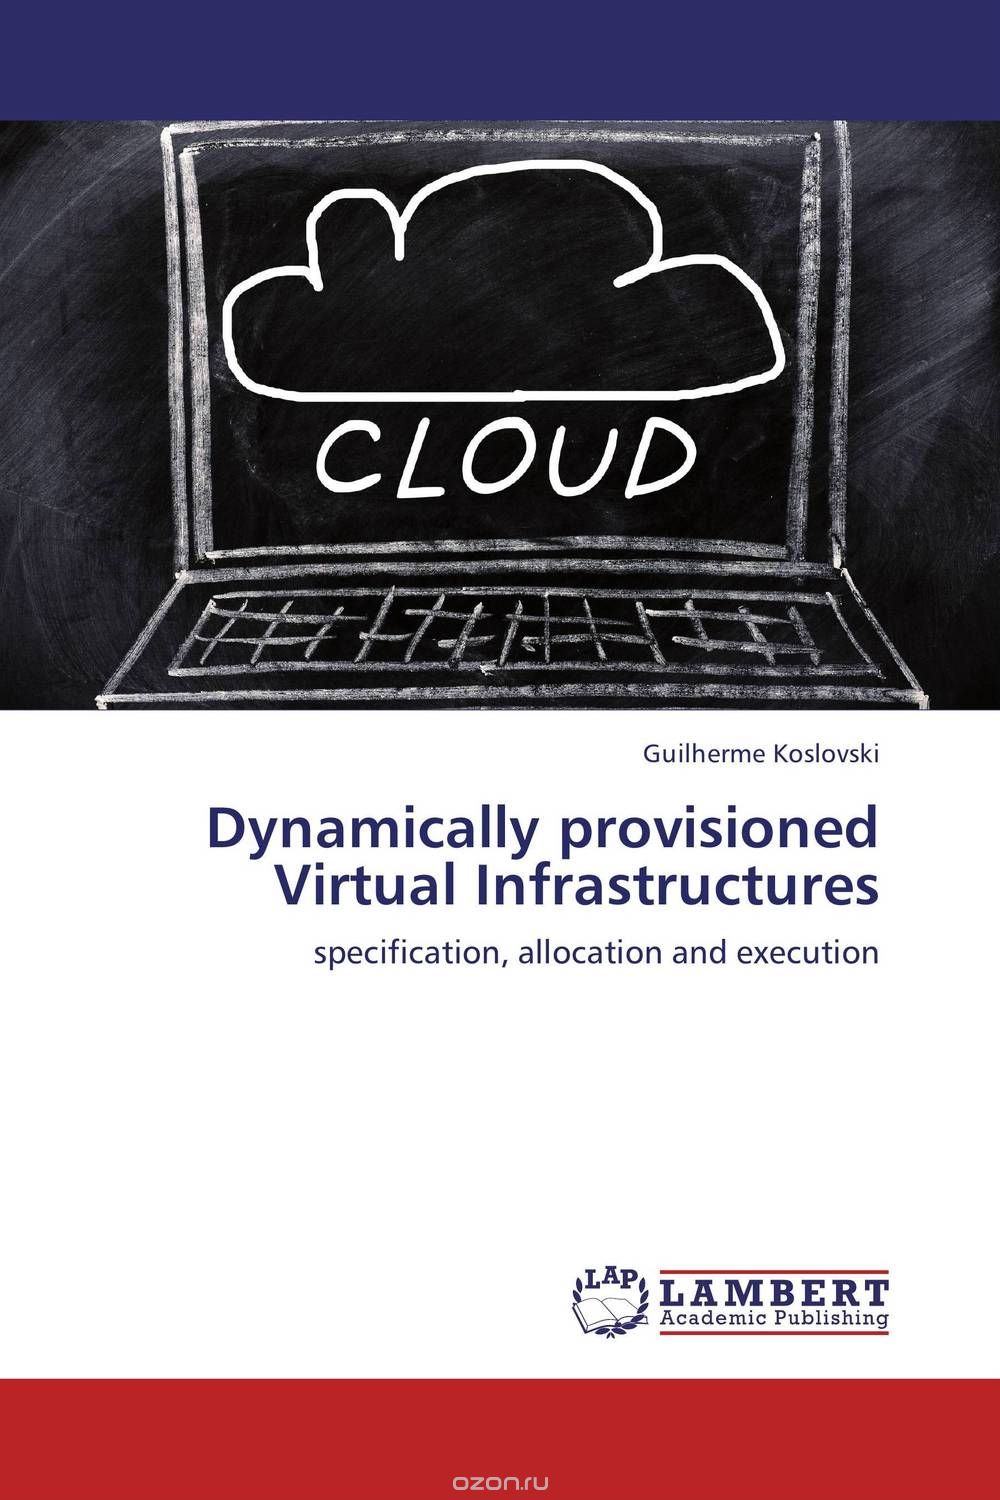 Dynamically provisioned Virtual Infrastructures